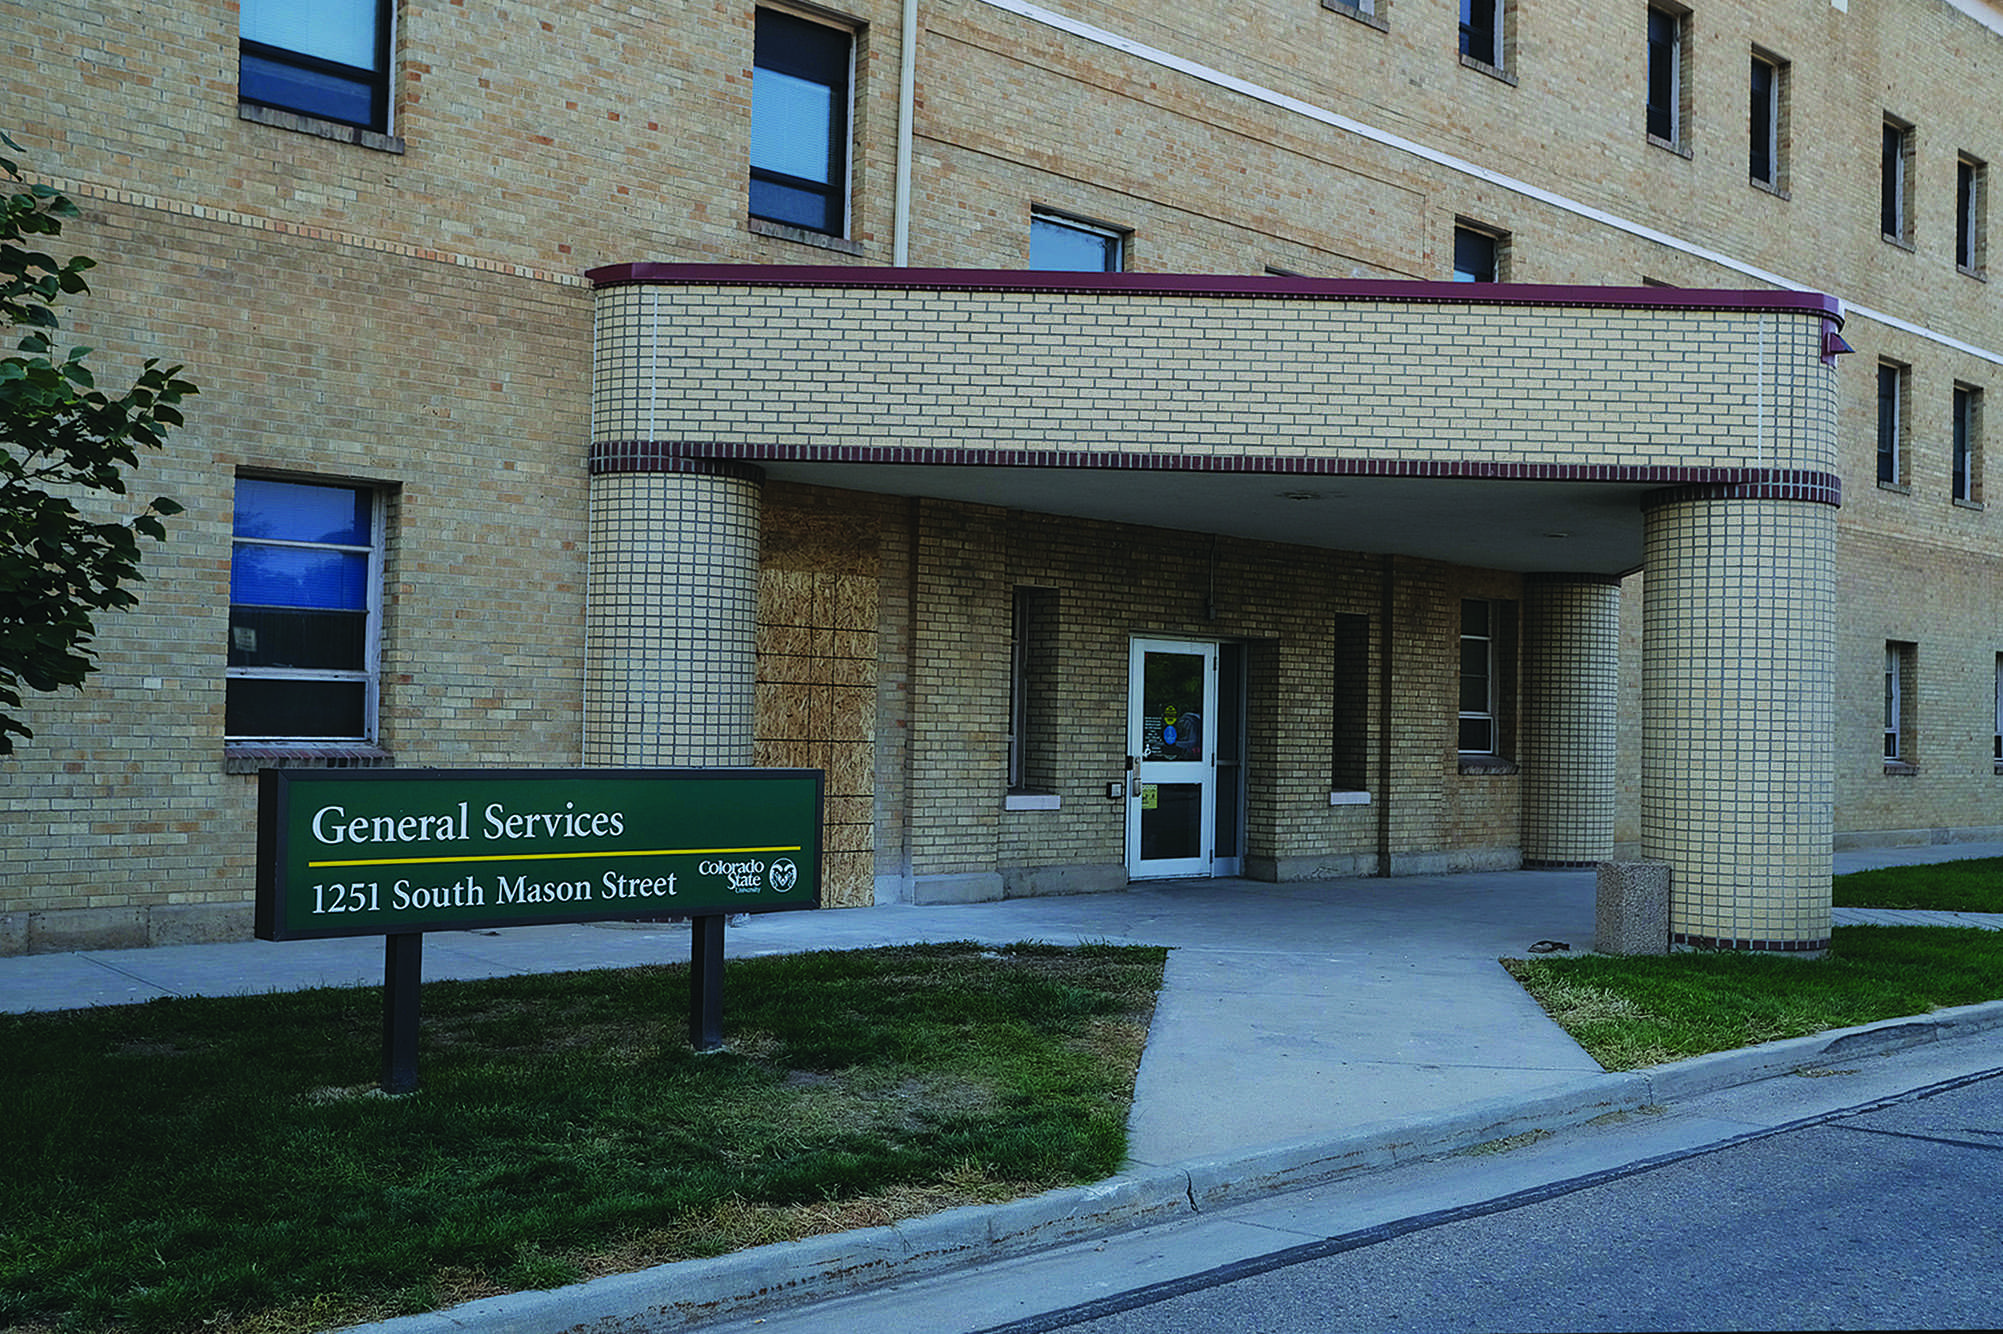 the UTC sits inside the General Services building